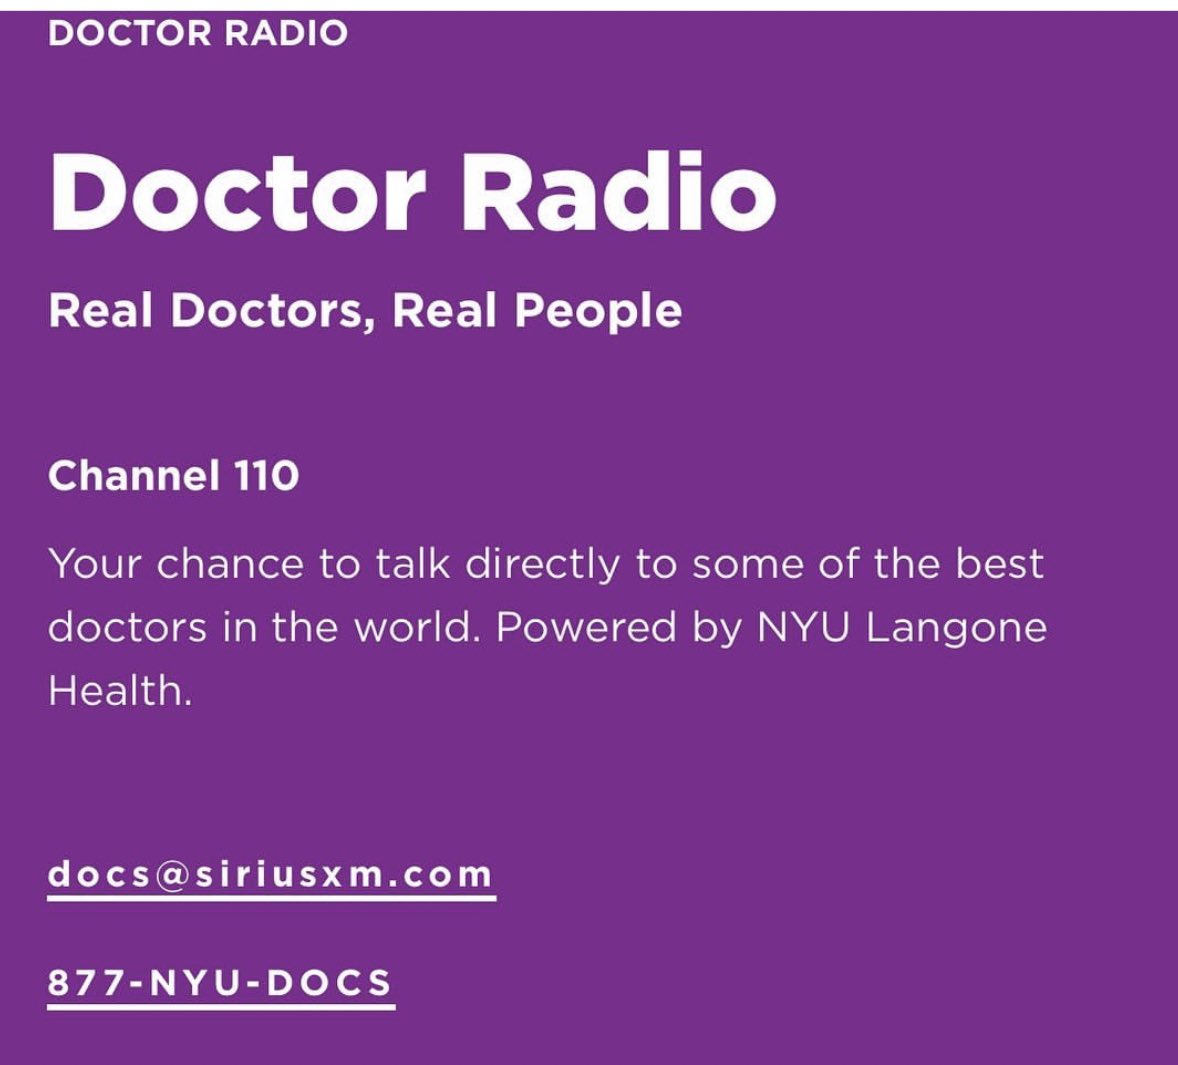 📣📣So excited!! Join me tonight on @SIRIUSXM 110 @NYUDocs Doctor Radio with @Hossein5555  TONIGHT @7PM EST for some highly engaging content on all things #PeyroniesDisease #WomenInUrology #SexMed @IUuro 

Don’t forget to 

📞 In with ❓s!!